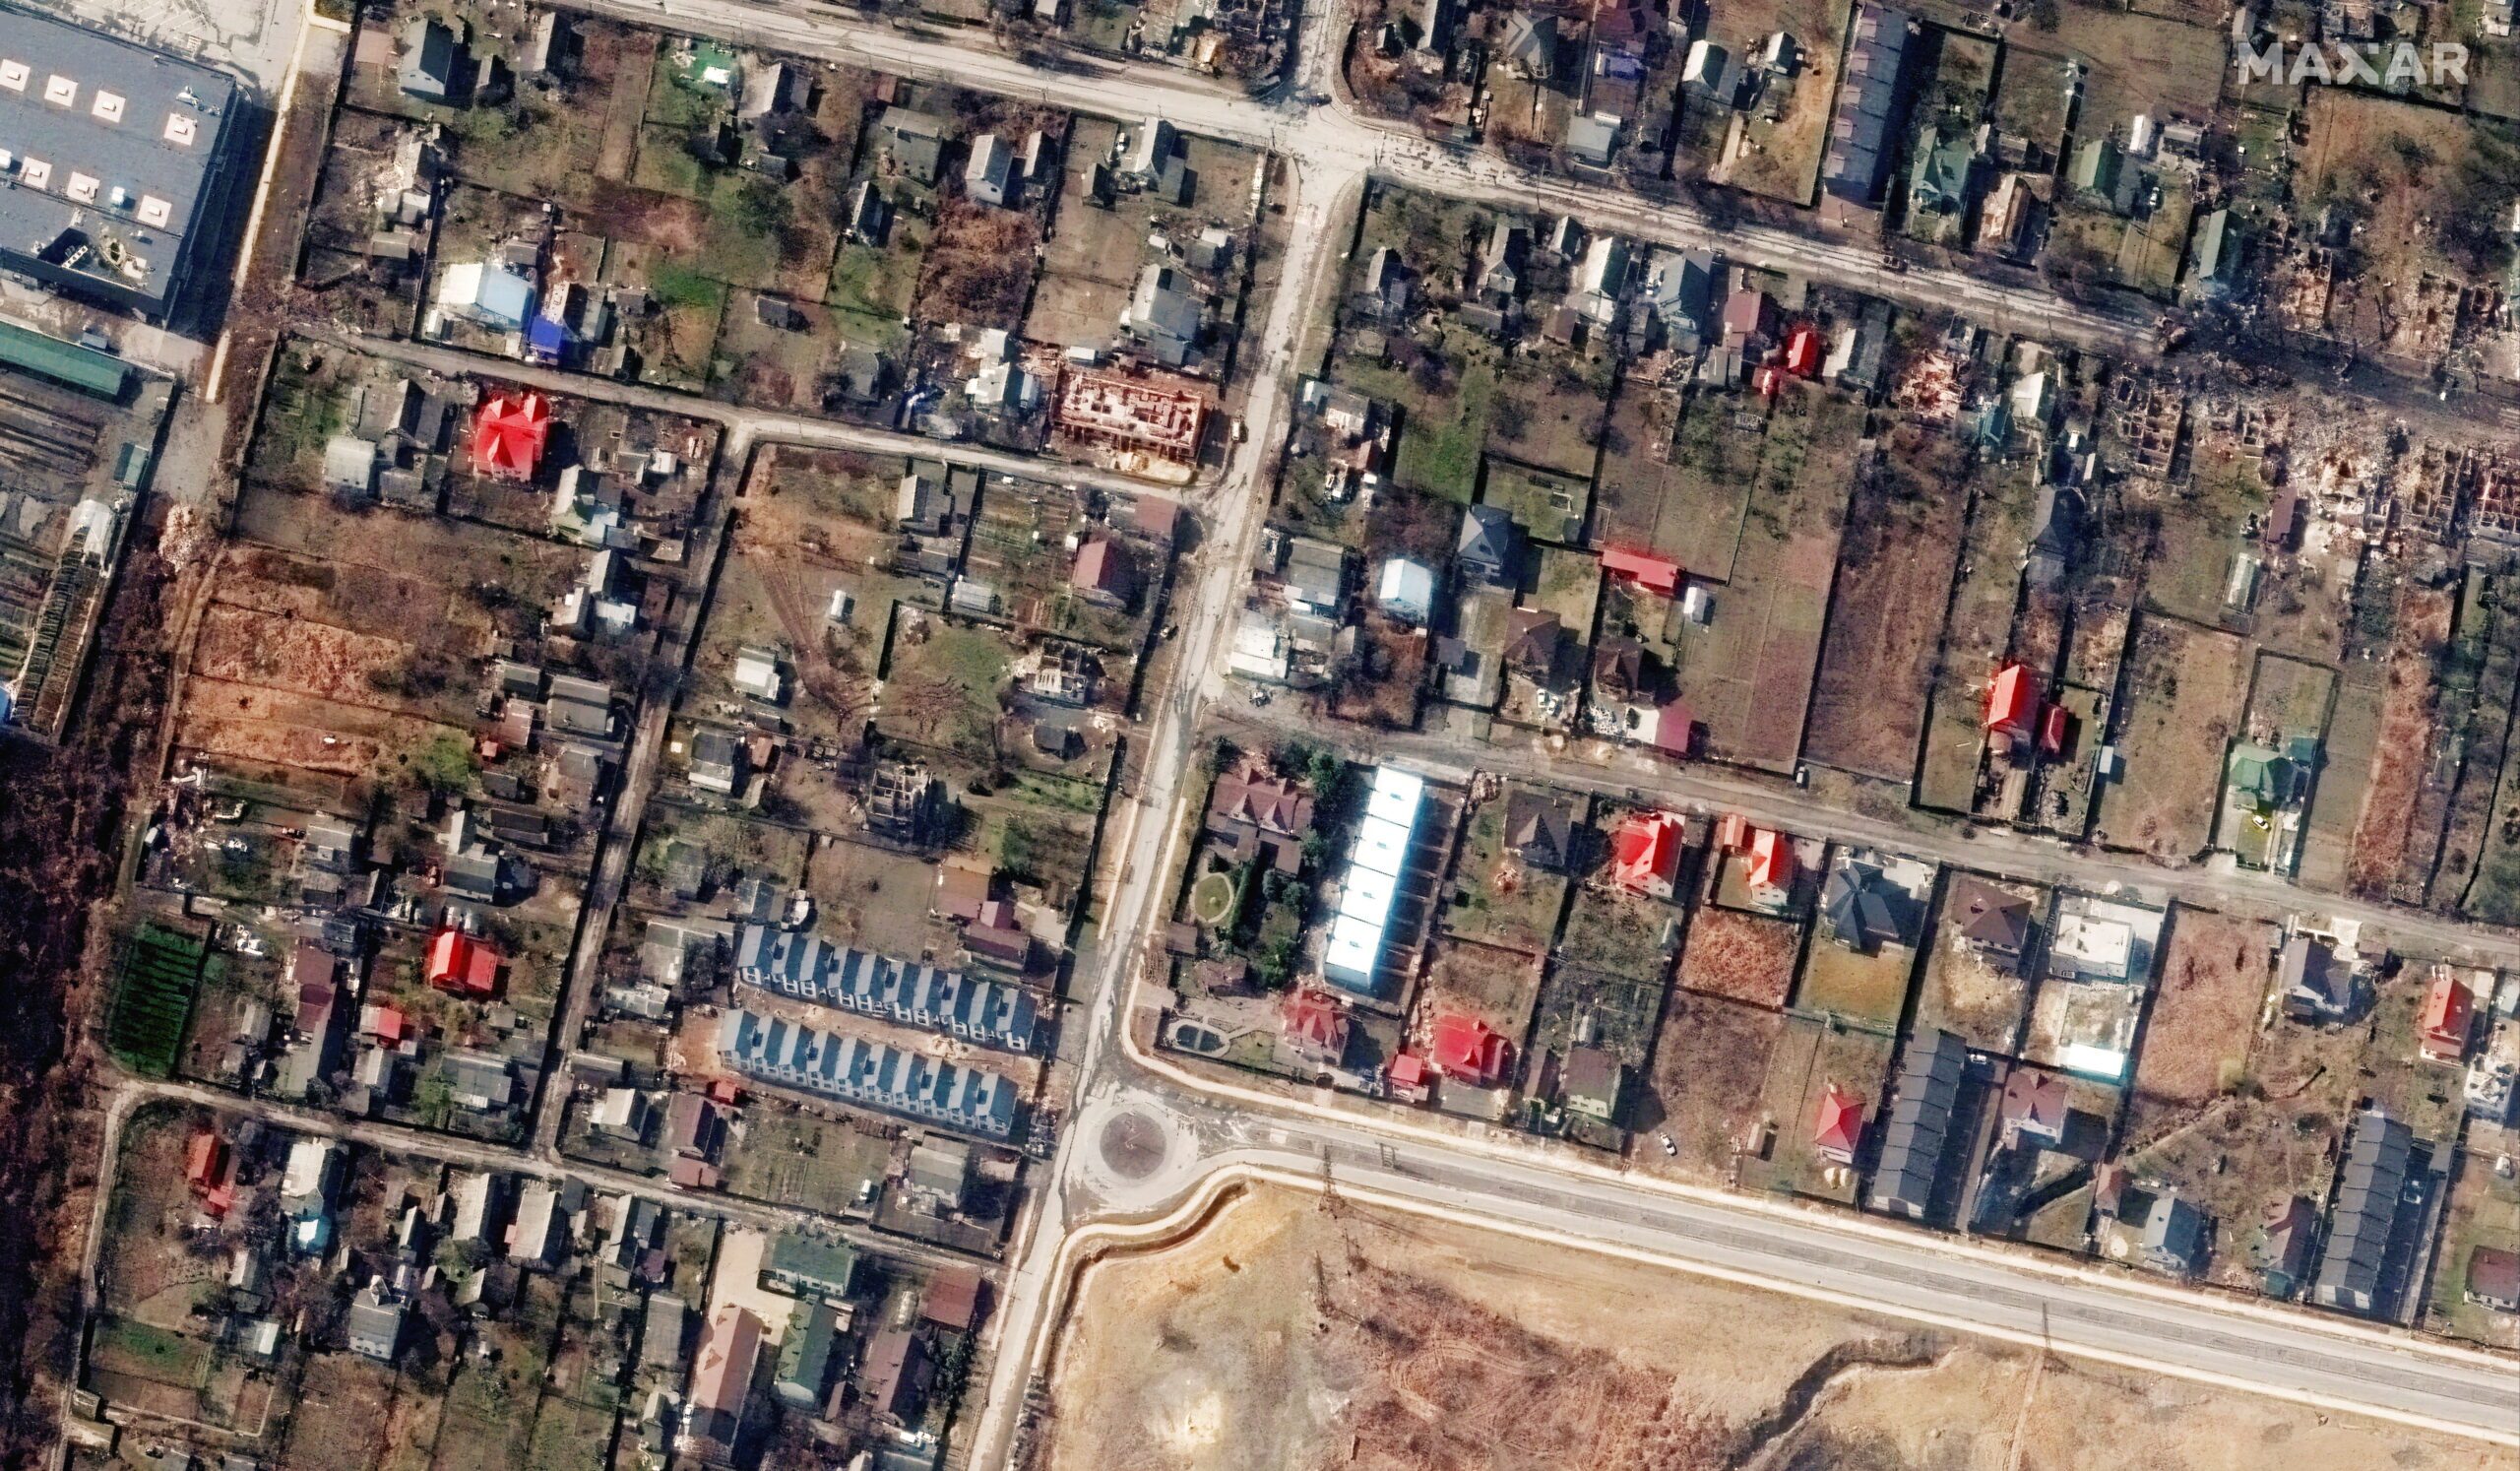 Satellite images show civilian deaths in Ukraine town while it was in Russian hands – Maxar